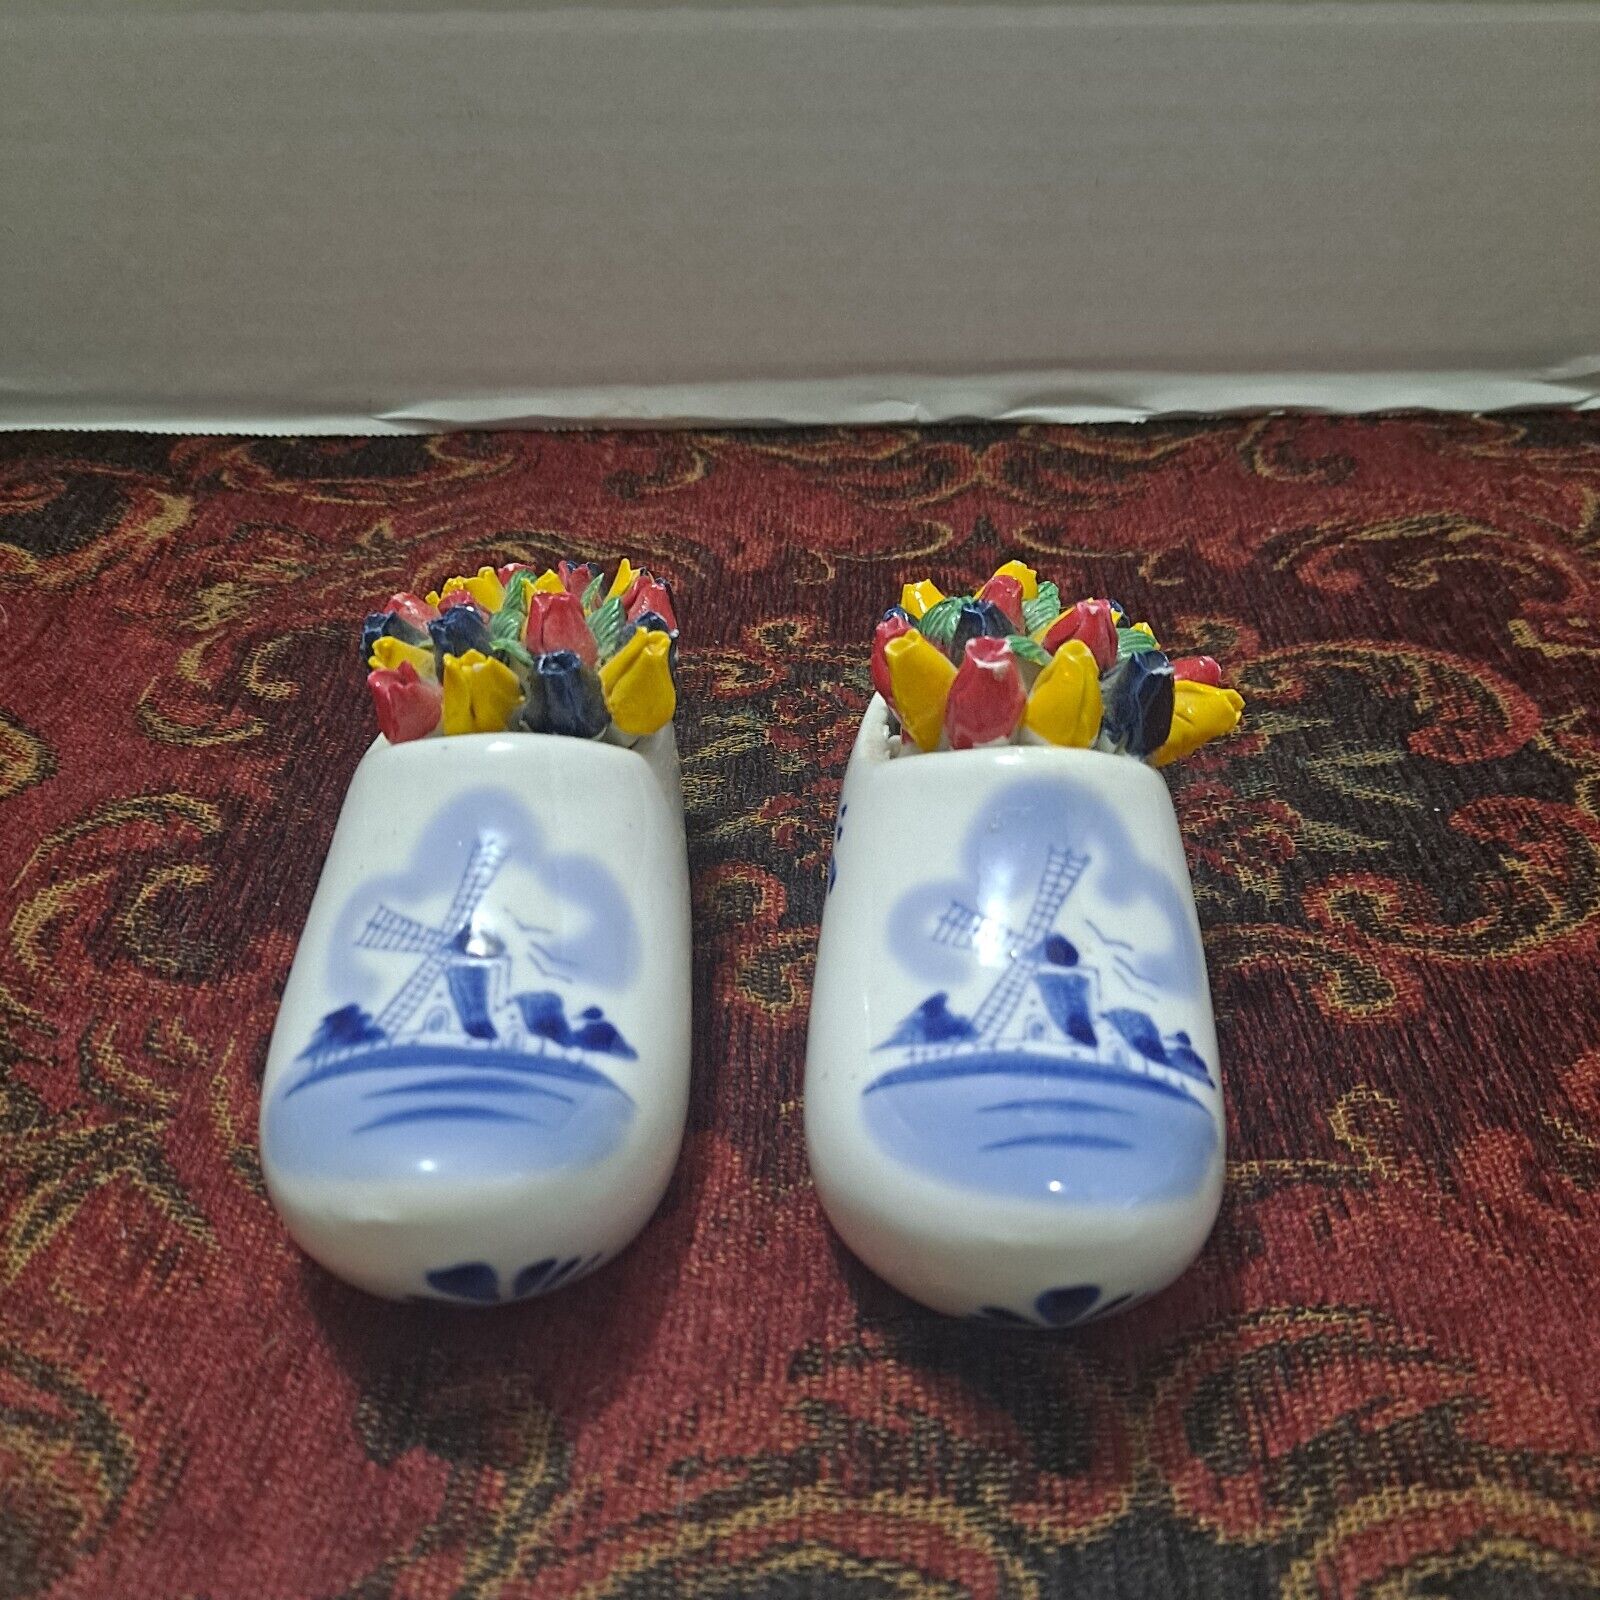 Pair of Hand Painted Numbered Blue White Holland Shoes Figurines With Tulips